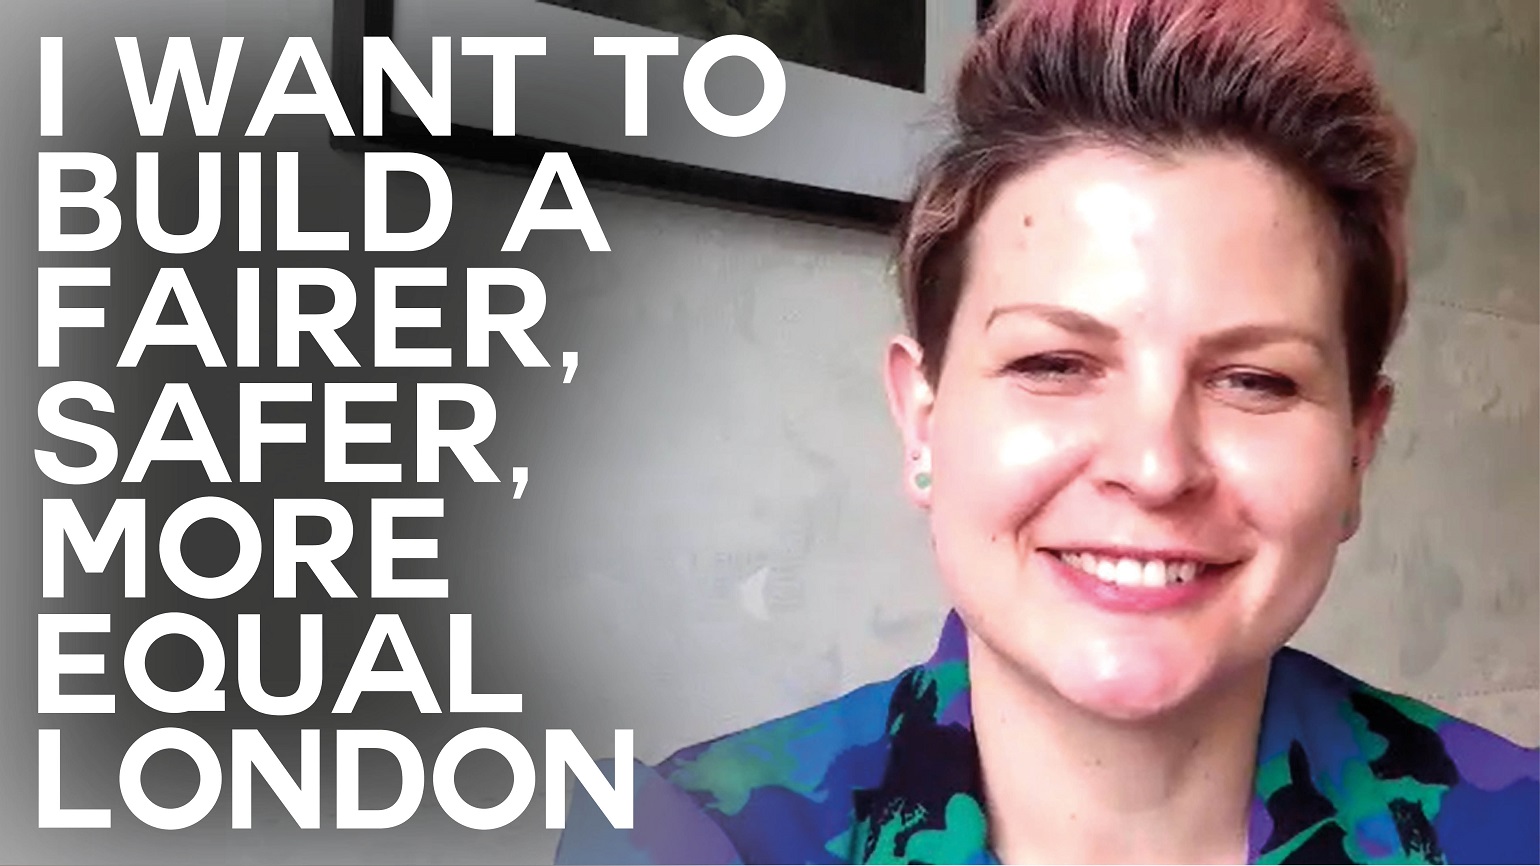 A still of an interview with Zoe Garbett with text overlaid reading "I want to build a fairer, safer, more equal London